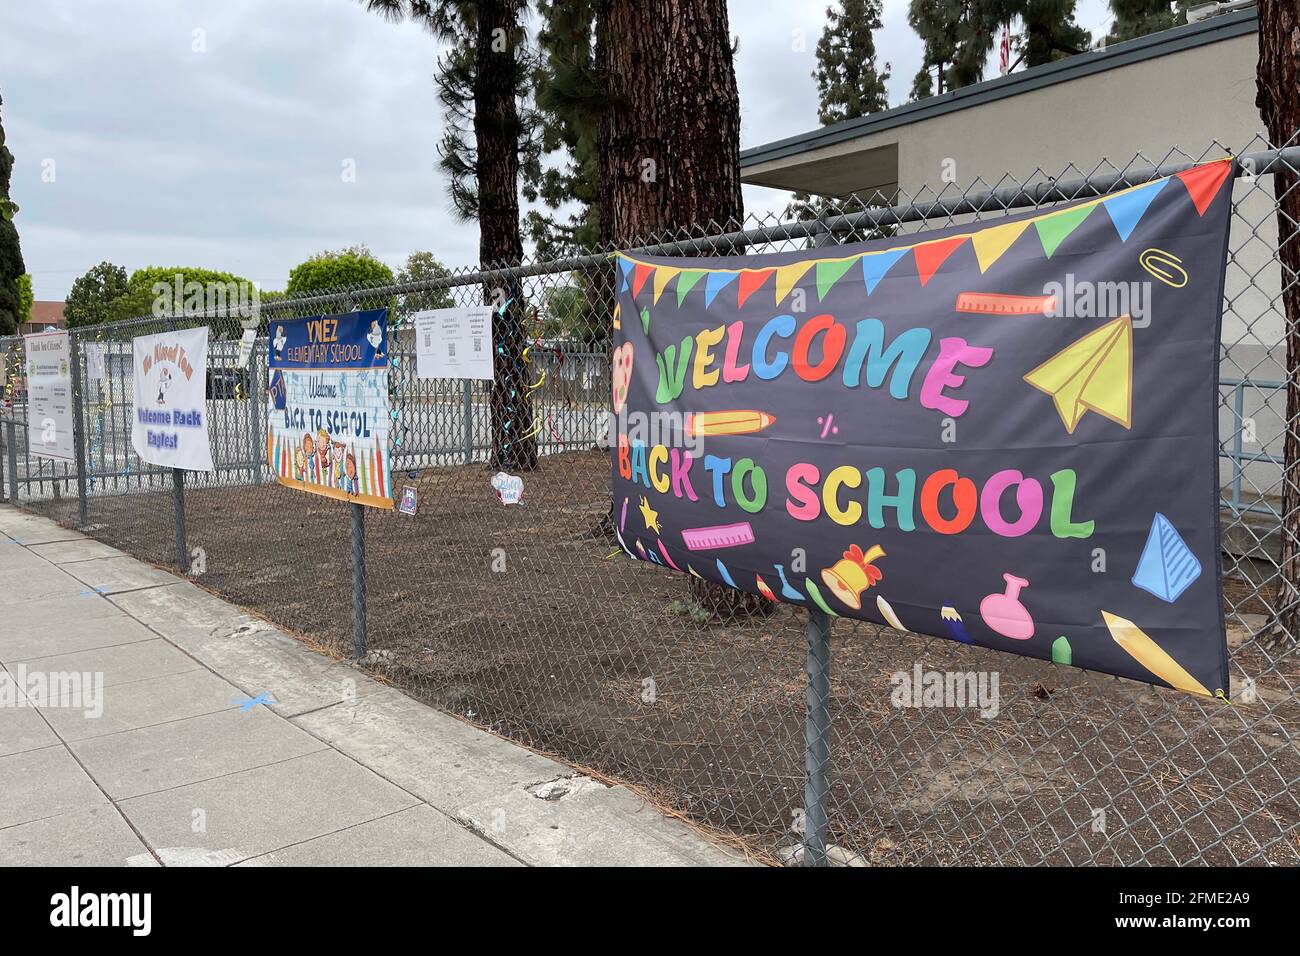 Welcome Back Signs at Ynez Elementary School, sabato 8 maggio 2021, in Monterey Park, Calif. Foto Stock